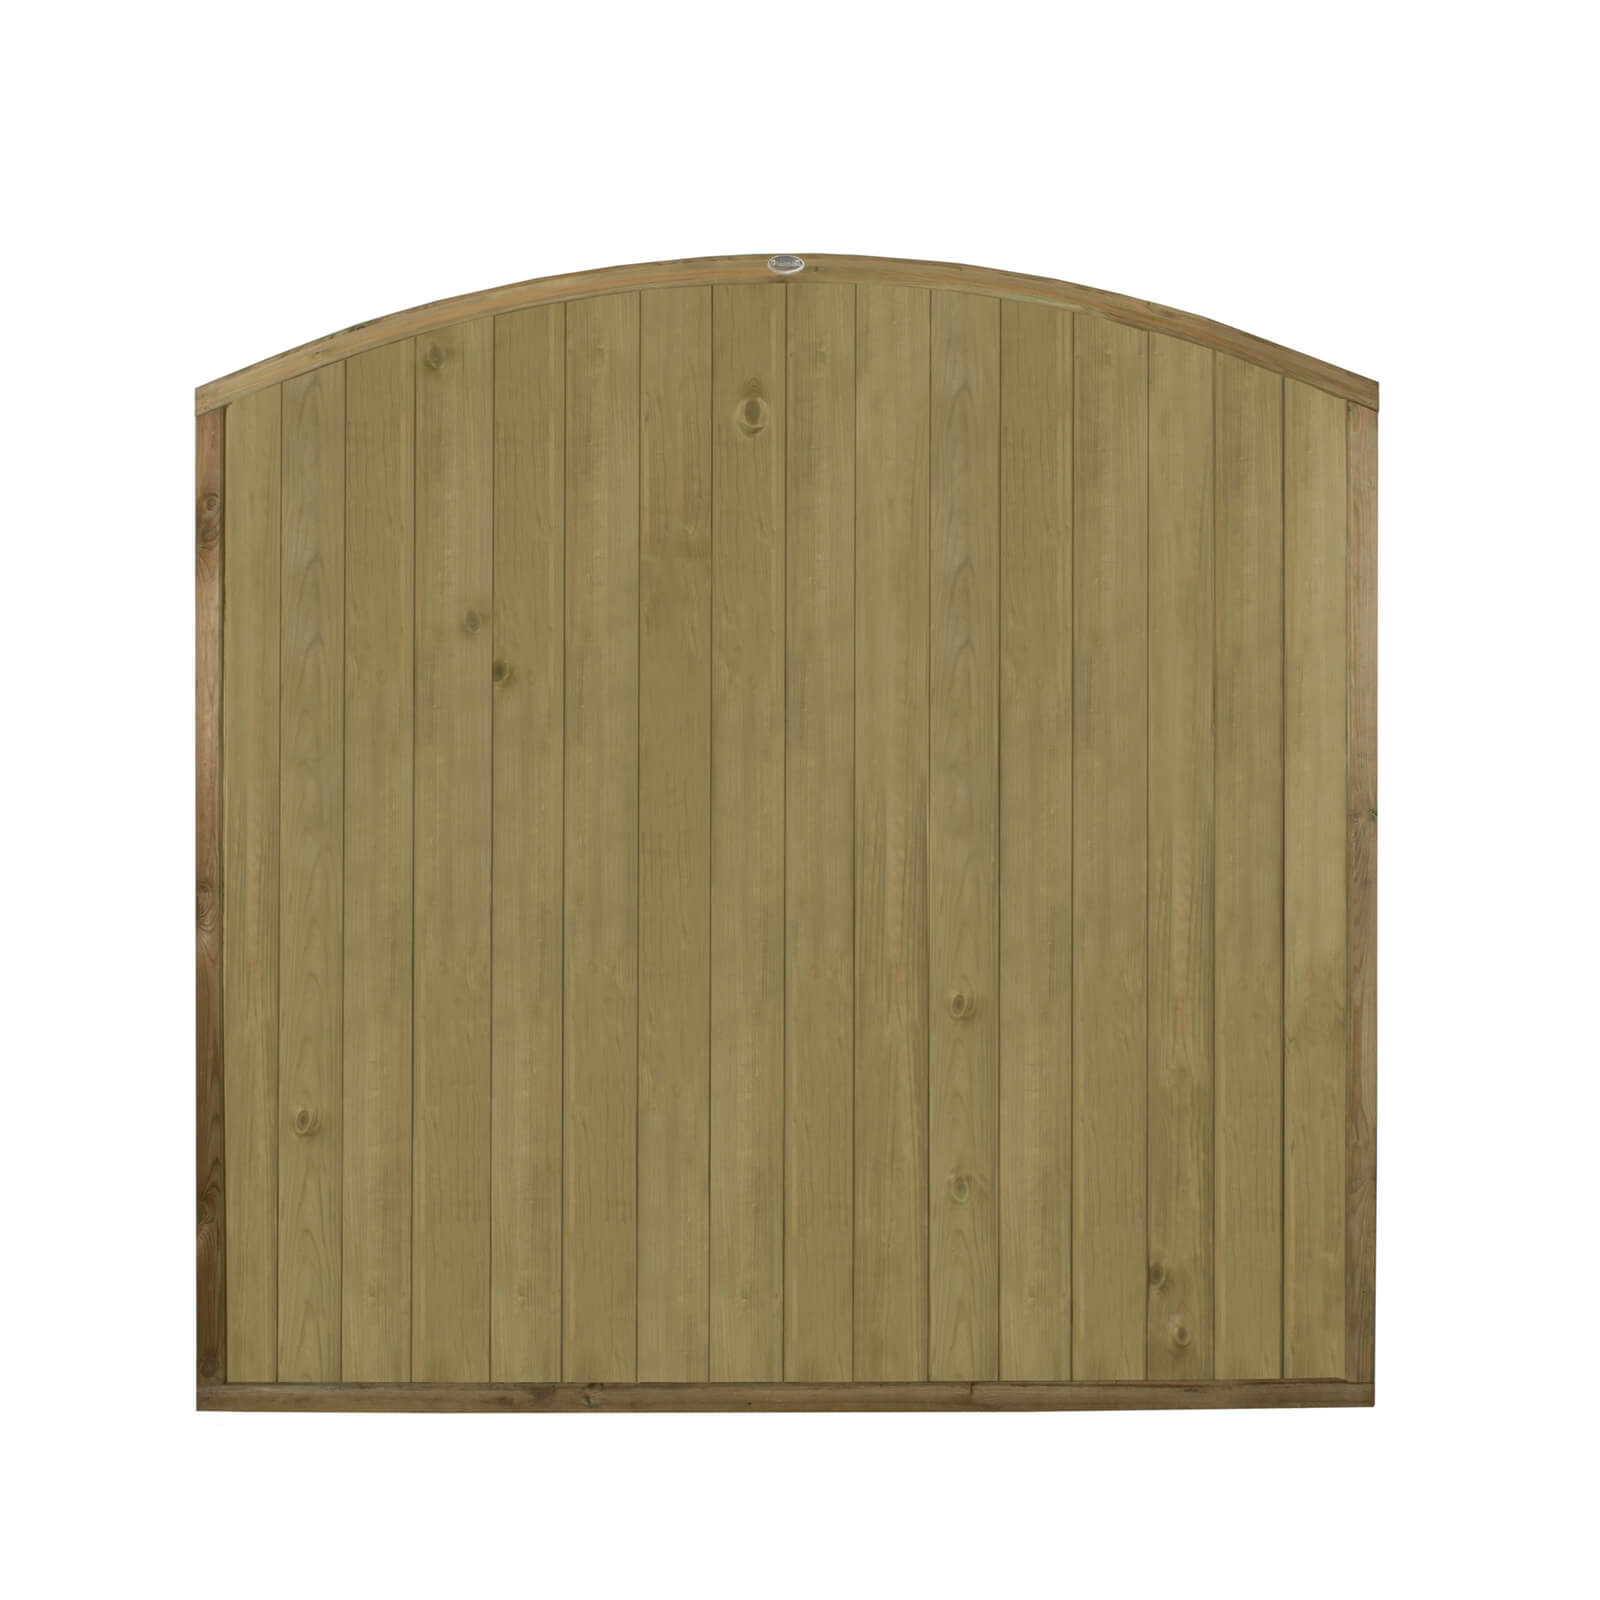 Forest Dome Tongue and Groove Panel - 6ft - Pack of 3